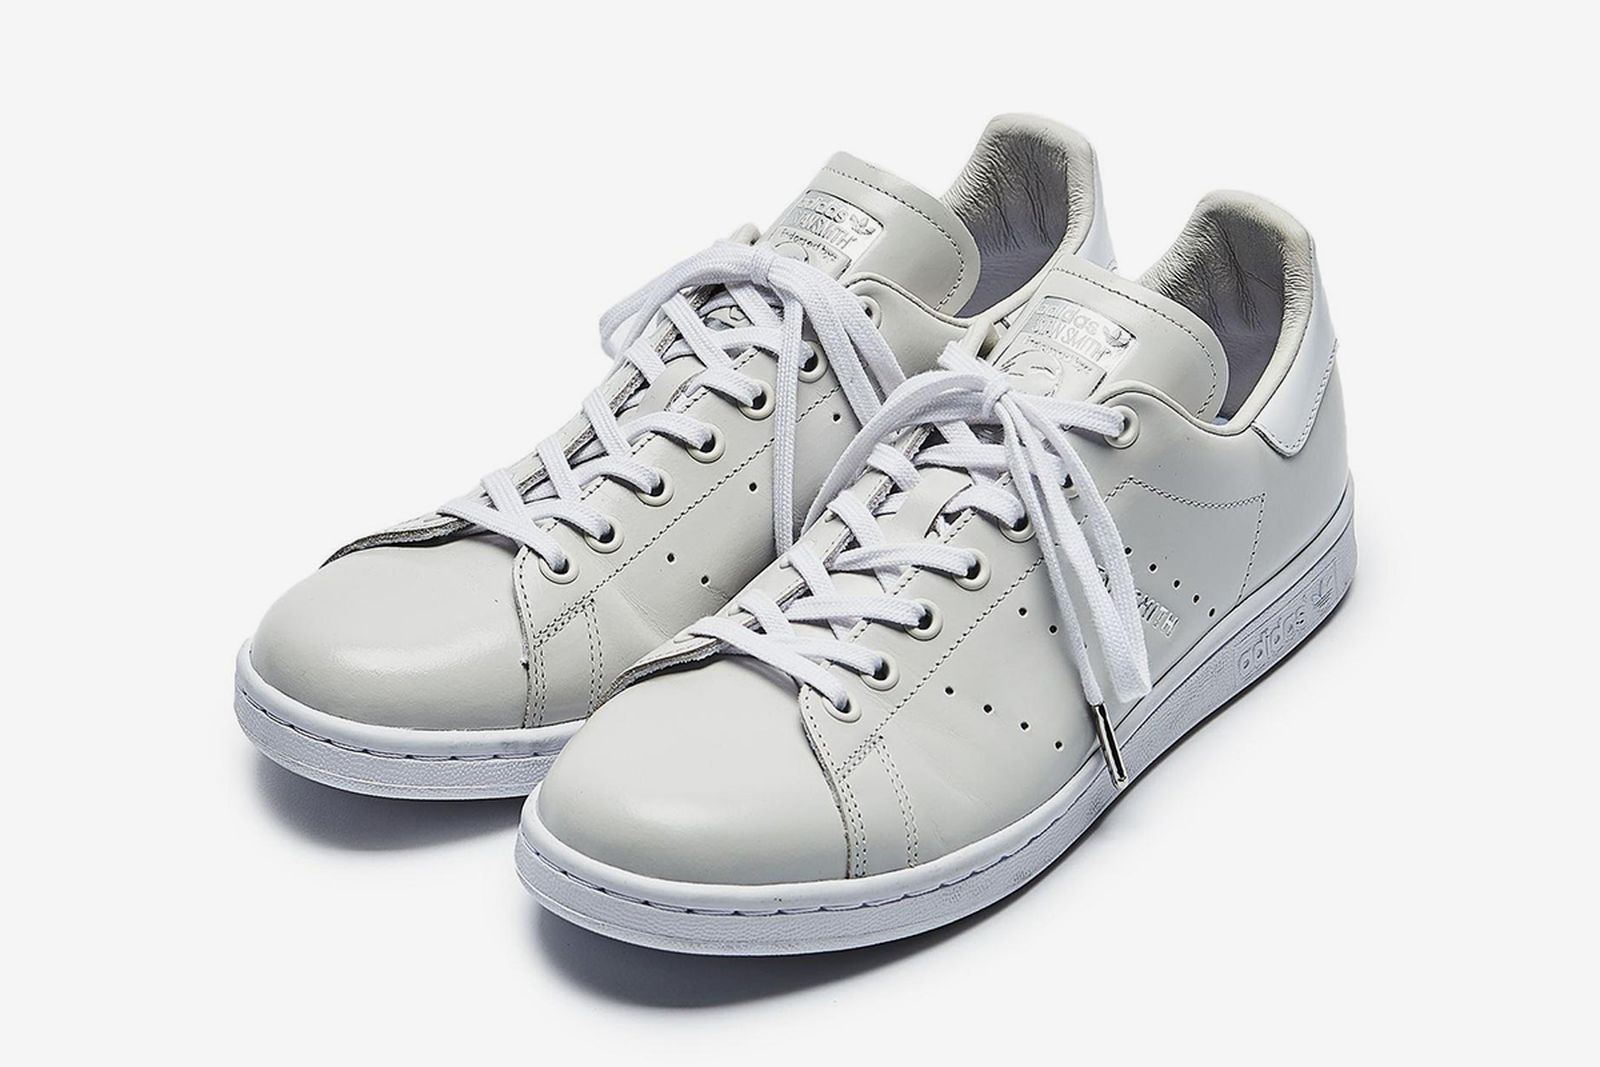 beauty-and-youth-adidas-stan-smith-release-date-price-10